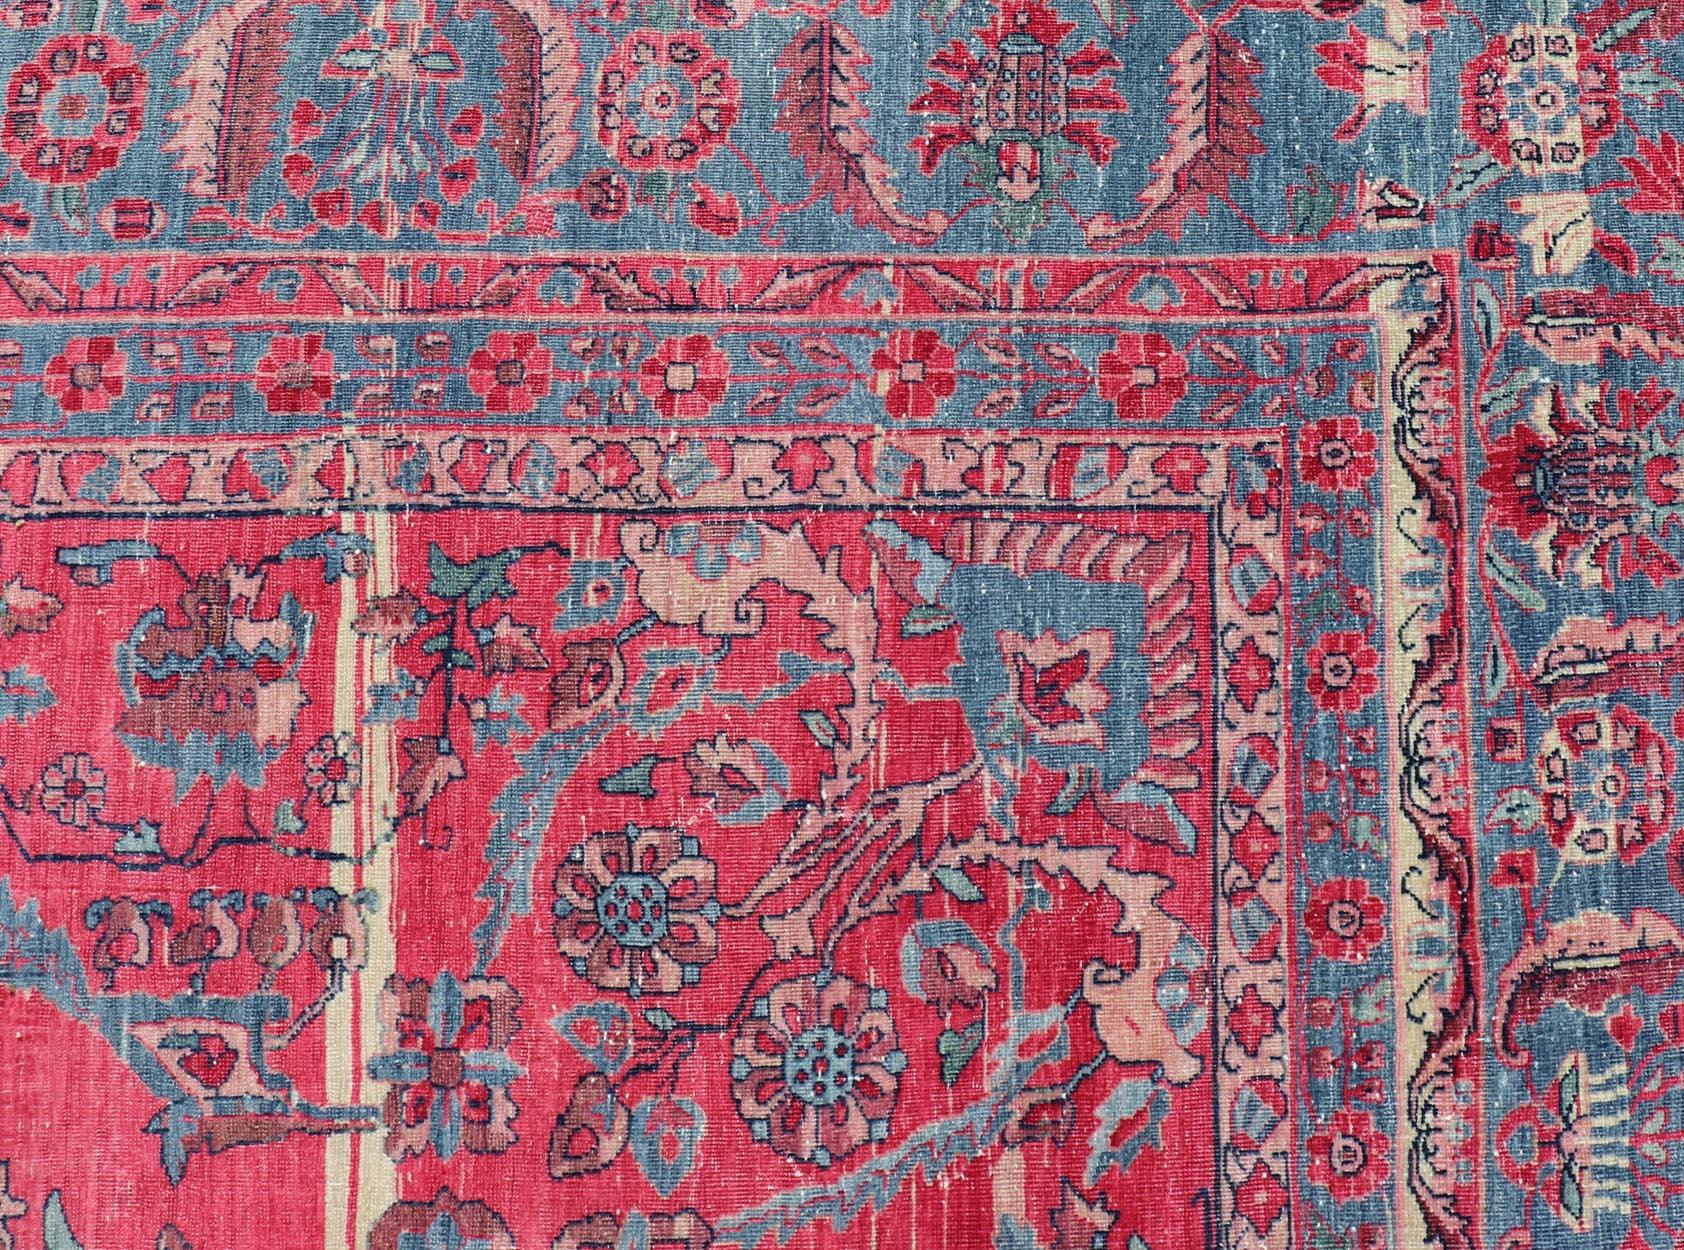 Antique Indian Lahore large carpet with floral design in soft magenta and blue. Keivan Woven Arts / 11-20530, circa 1910, Lahore carpet.
Measures: 10'6 x 16'0 
This finely woven gorgeous antique Indian Lahore, with its all-over floral pattern,